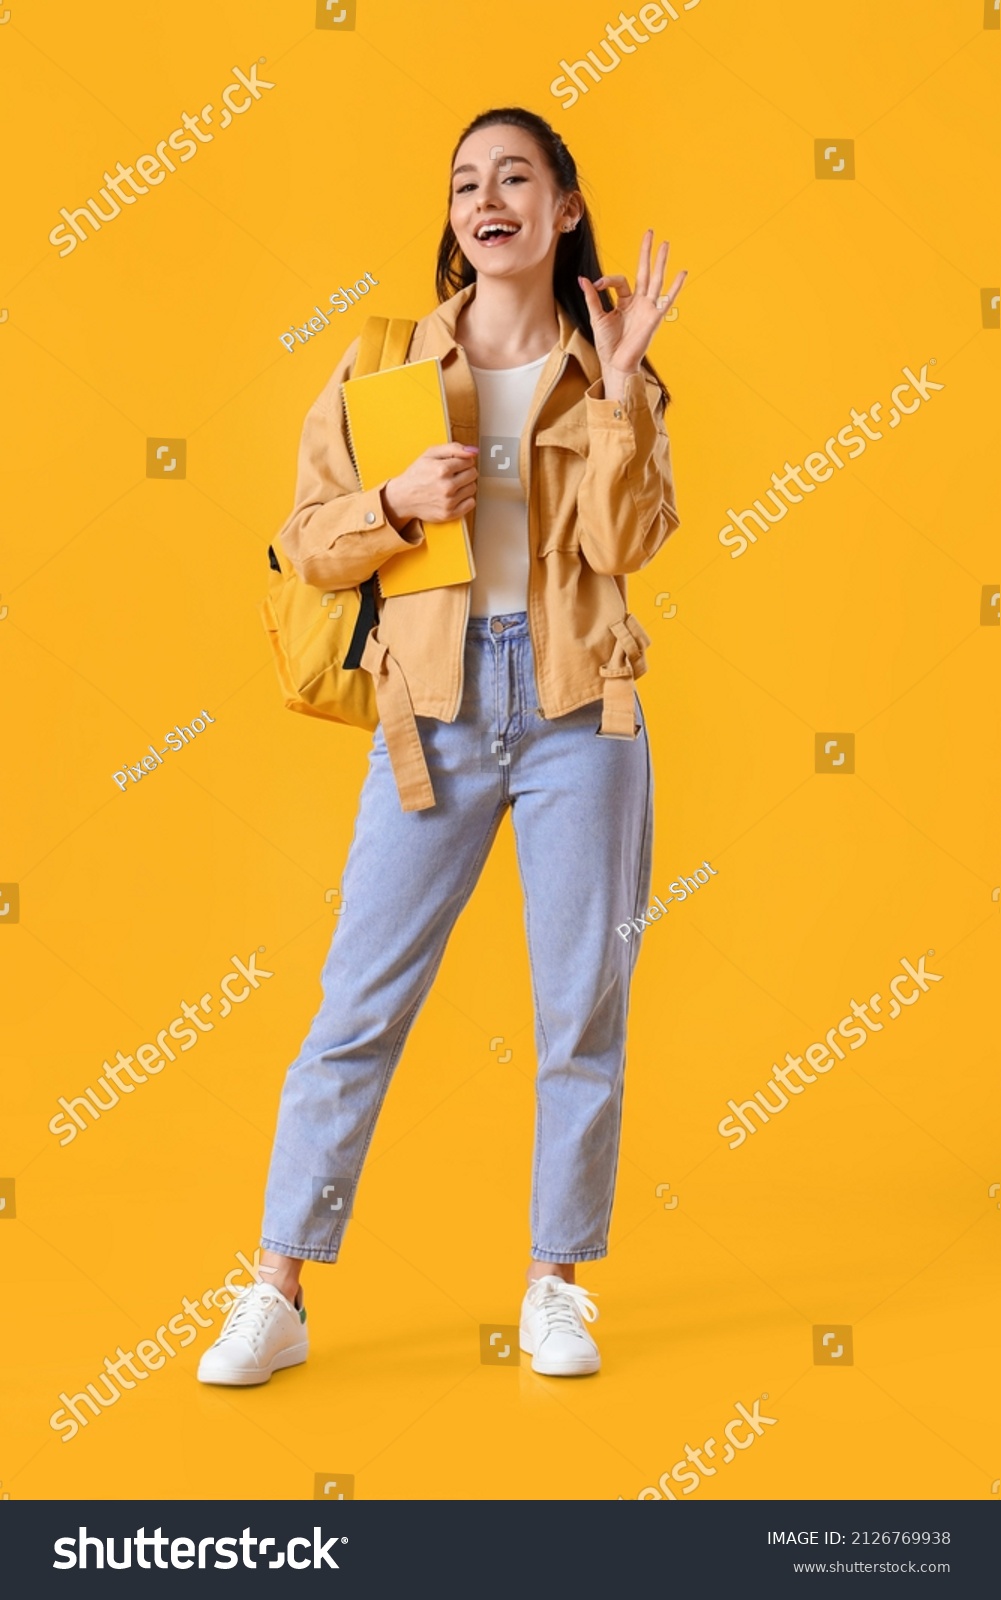 Portrait of beautiful female student showing OK gesture on color background #2126769938